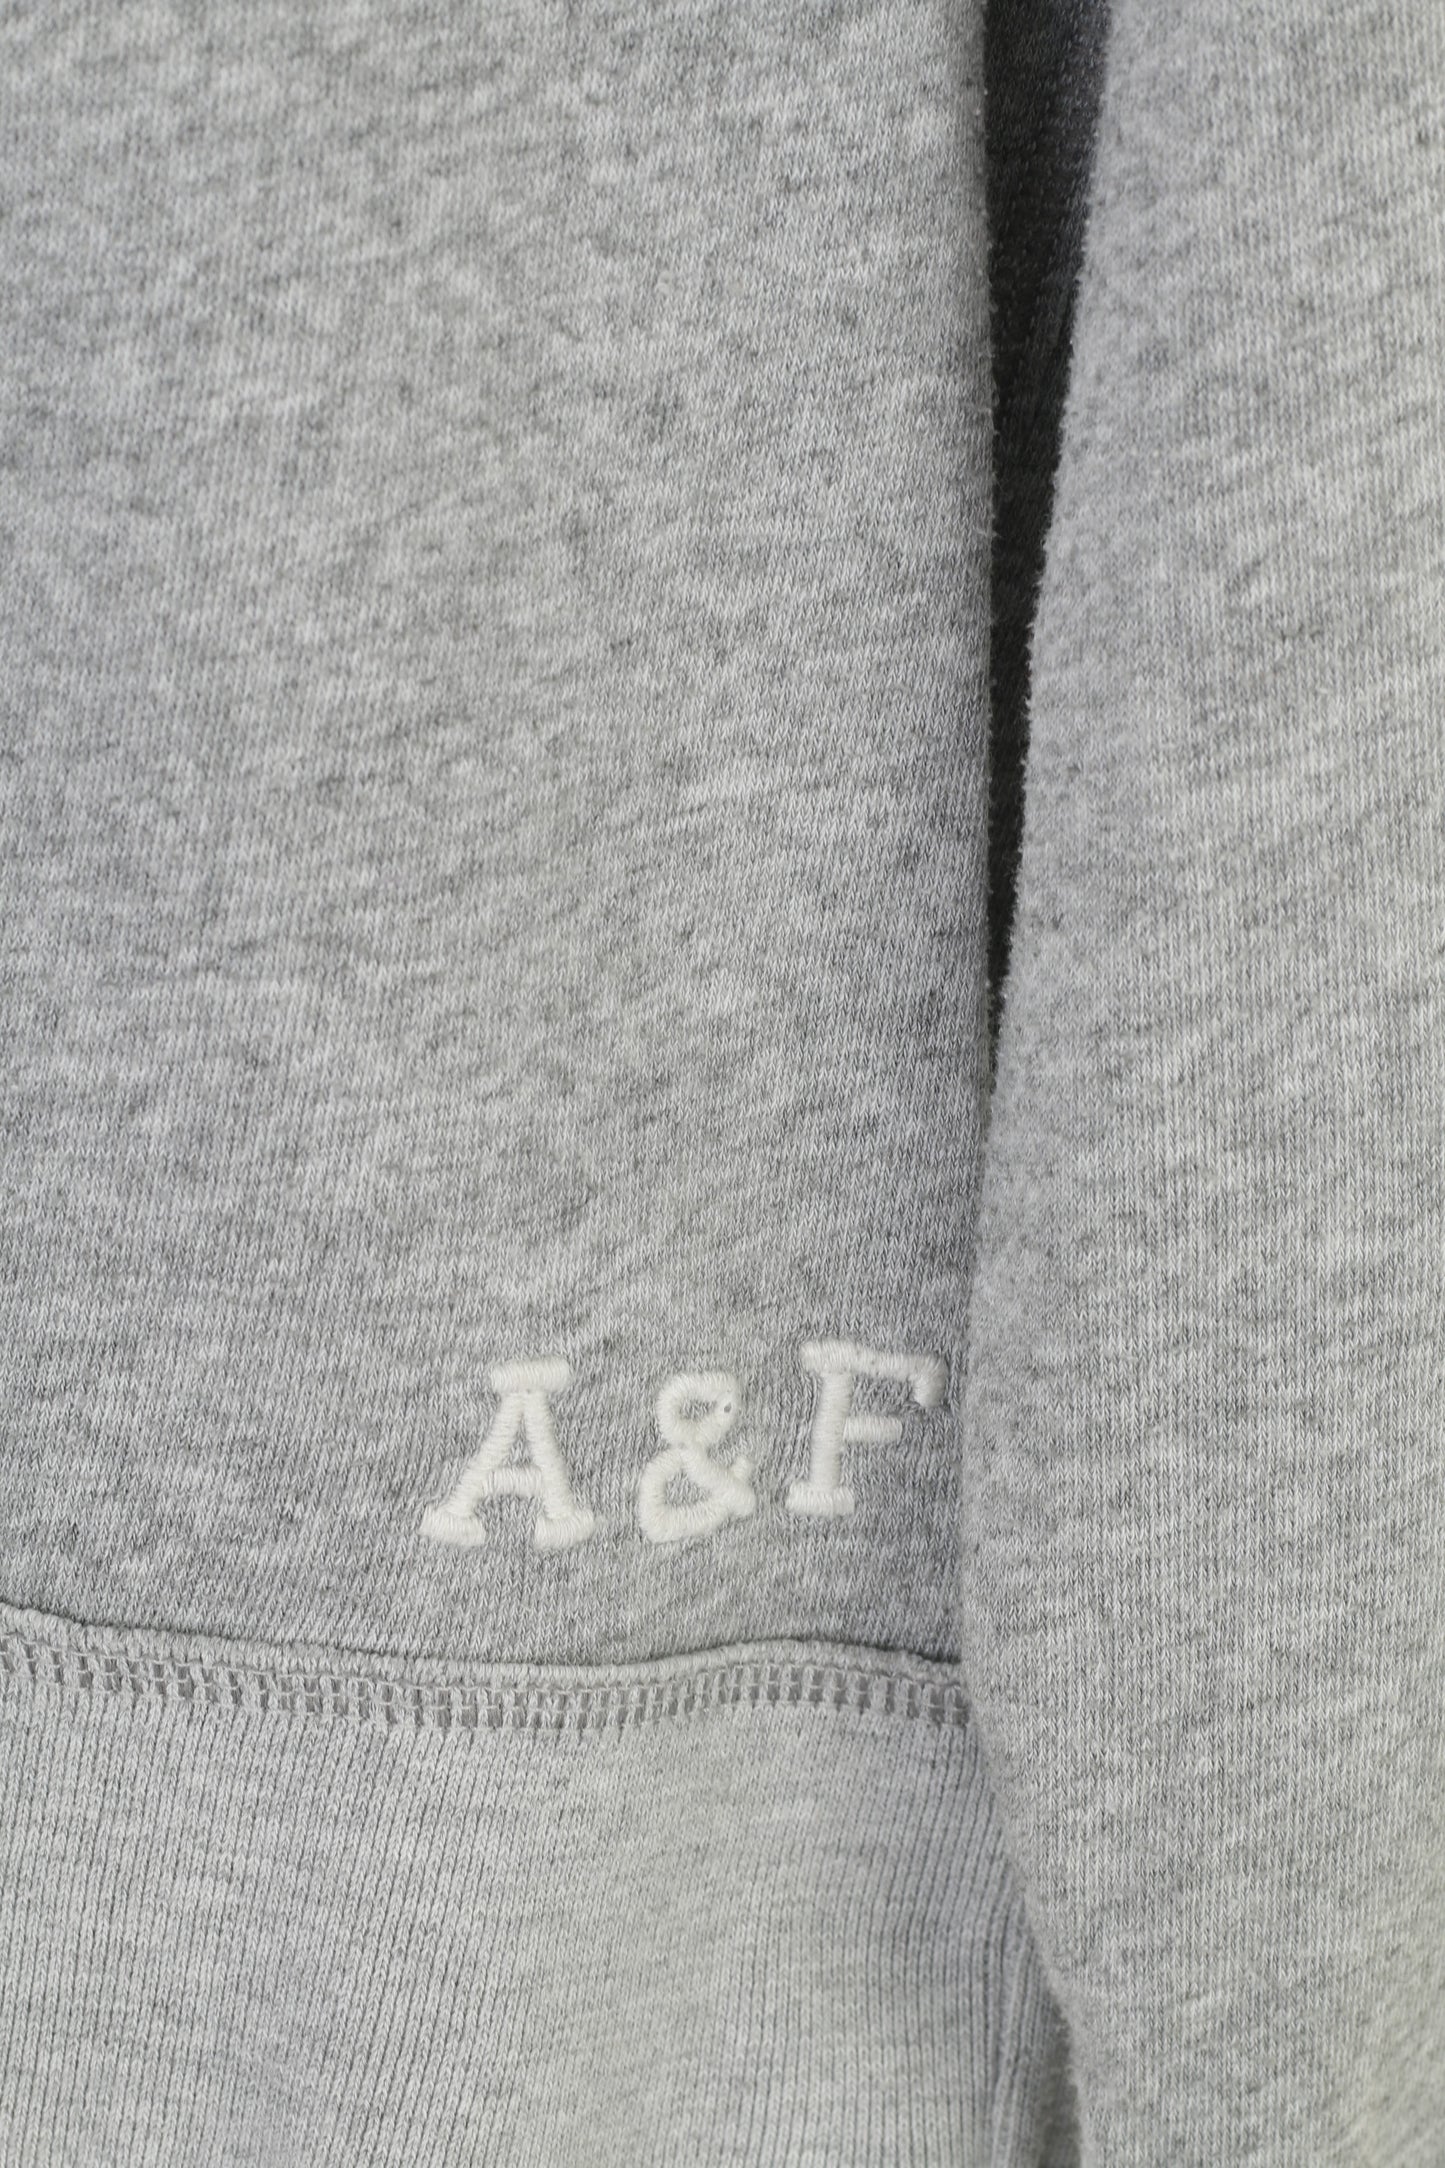 Abercrombie & Fitch Men S Sweatshirt Grey Muscle Cotton Crew Neck Embroidered Vintage Top